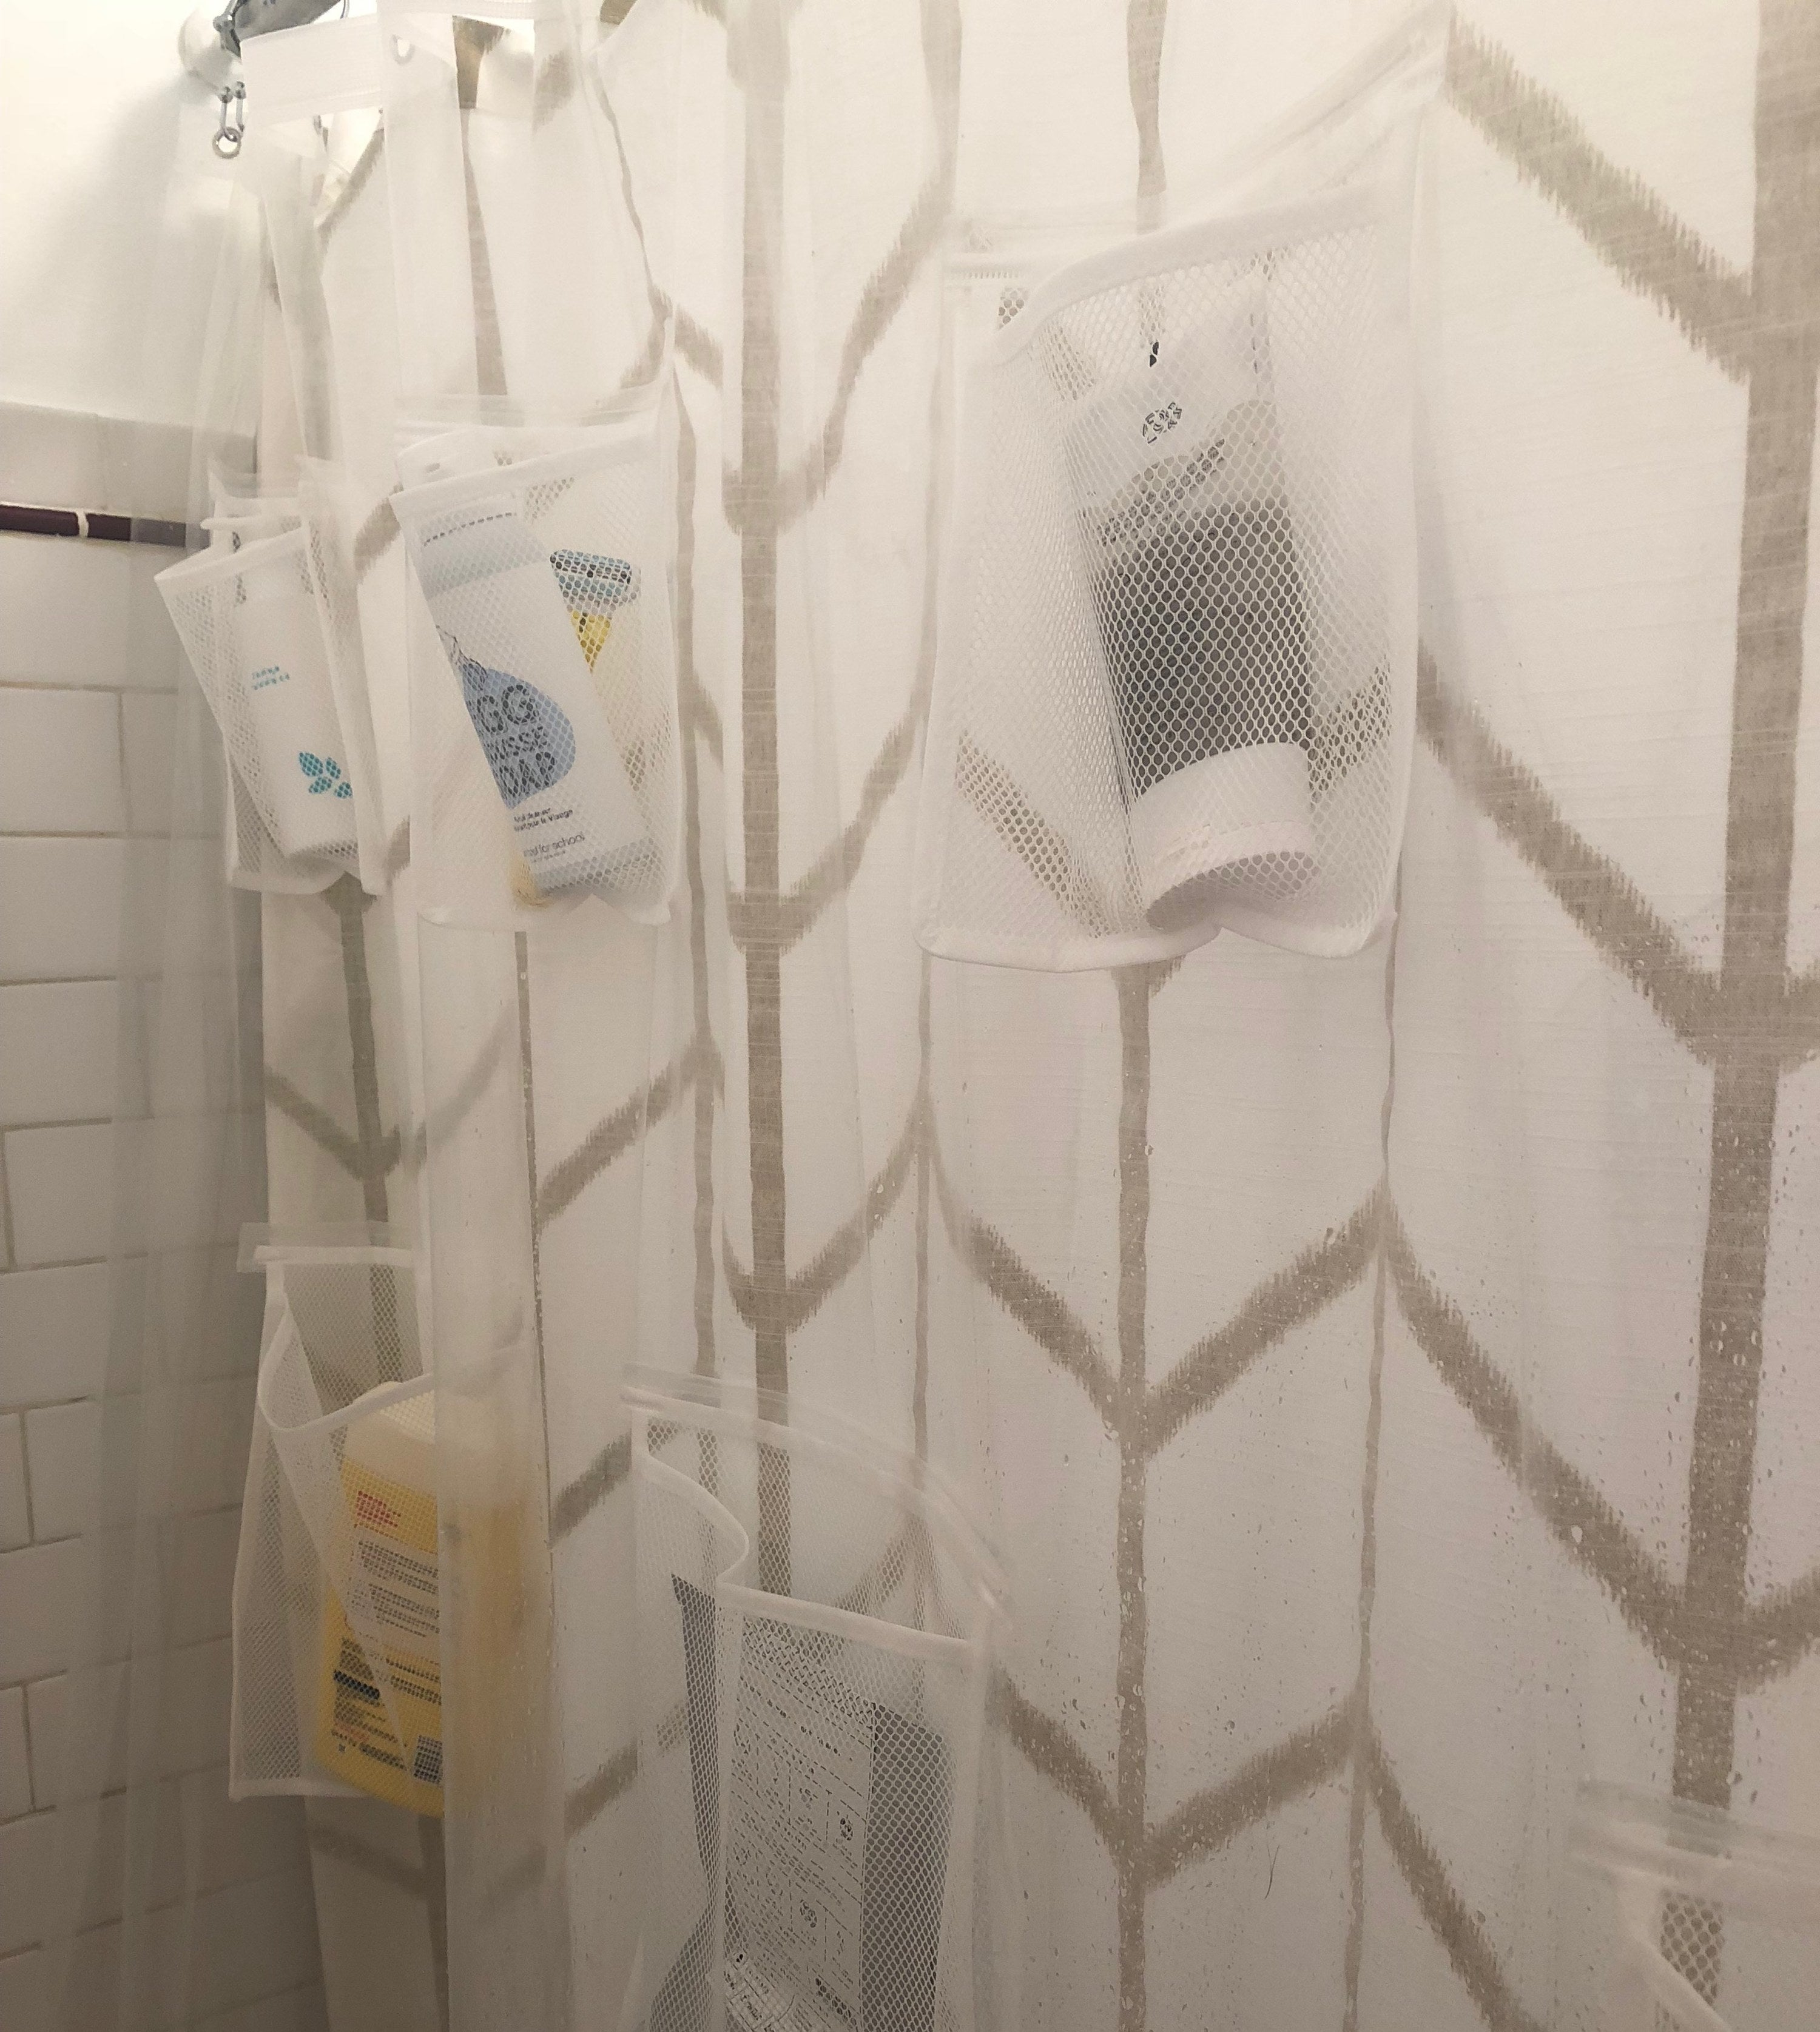 A shower with the pocketed shower curtain liner hanging up